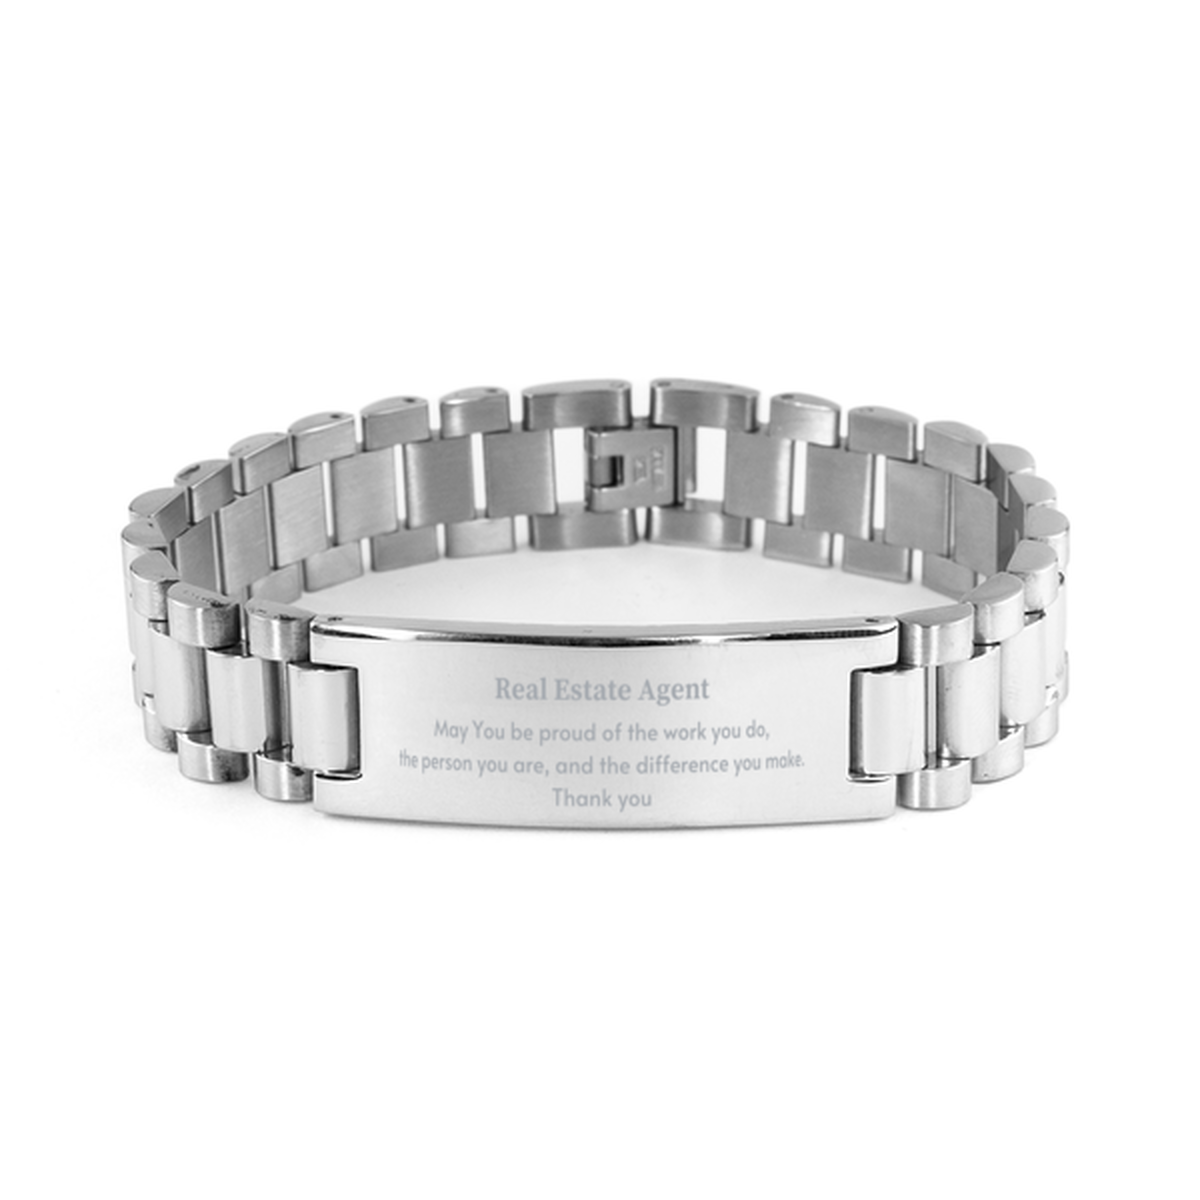 Heartwarming Ladder Stainless Steel Bracelet Retirement Coworkers Gifts for Real Estate Agent, Real Estate Agent May You be proud of the work you do, the person you are Gifts for Boss Men Women Friends